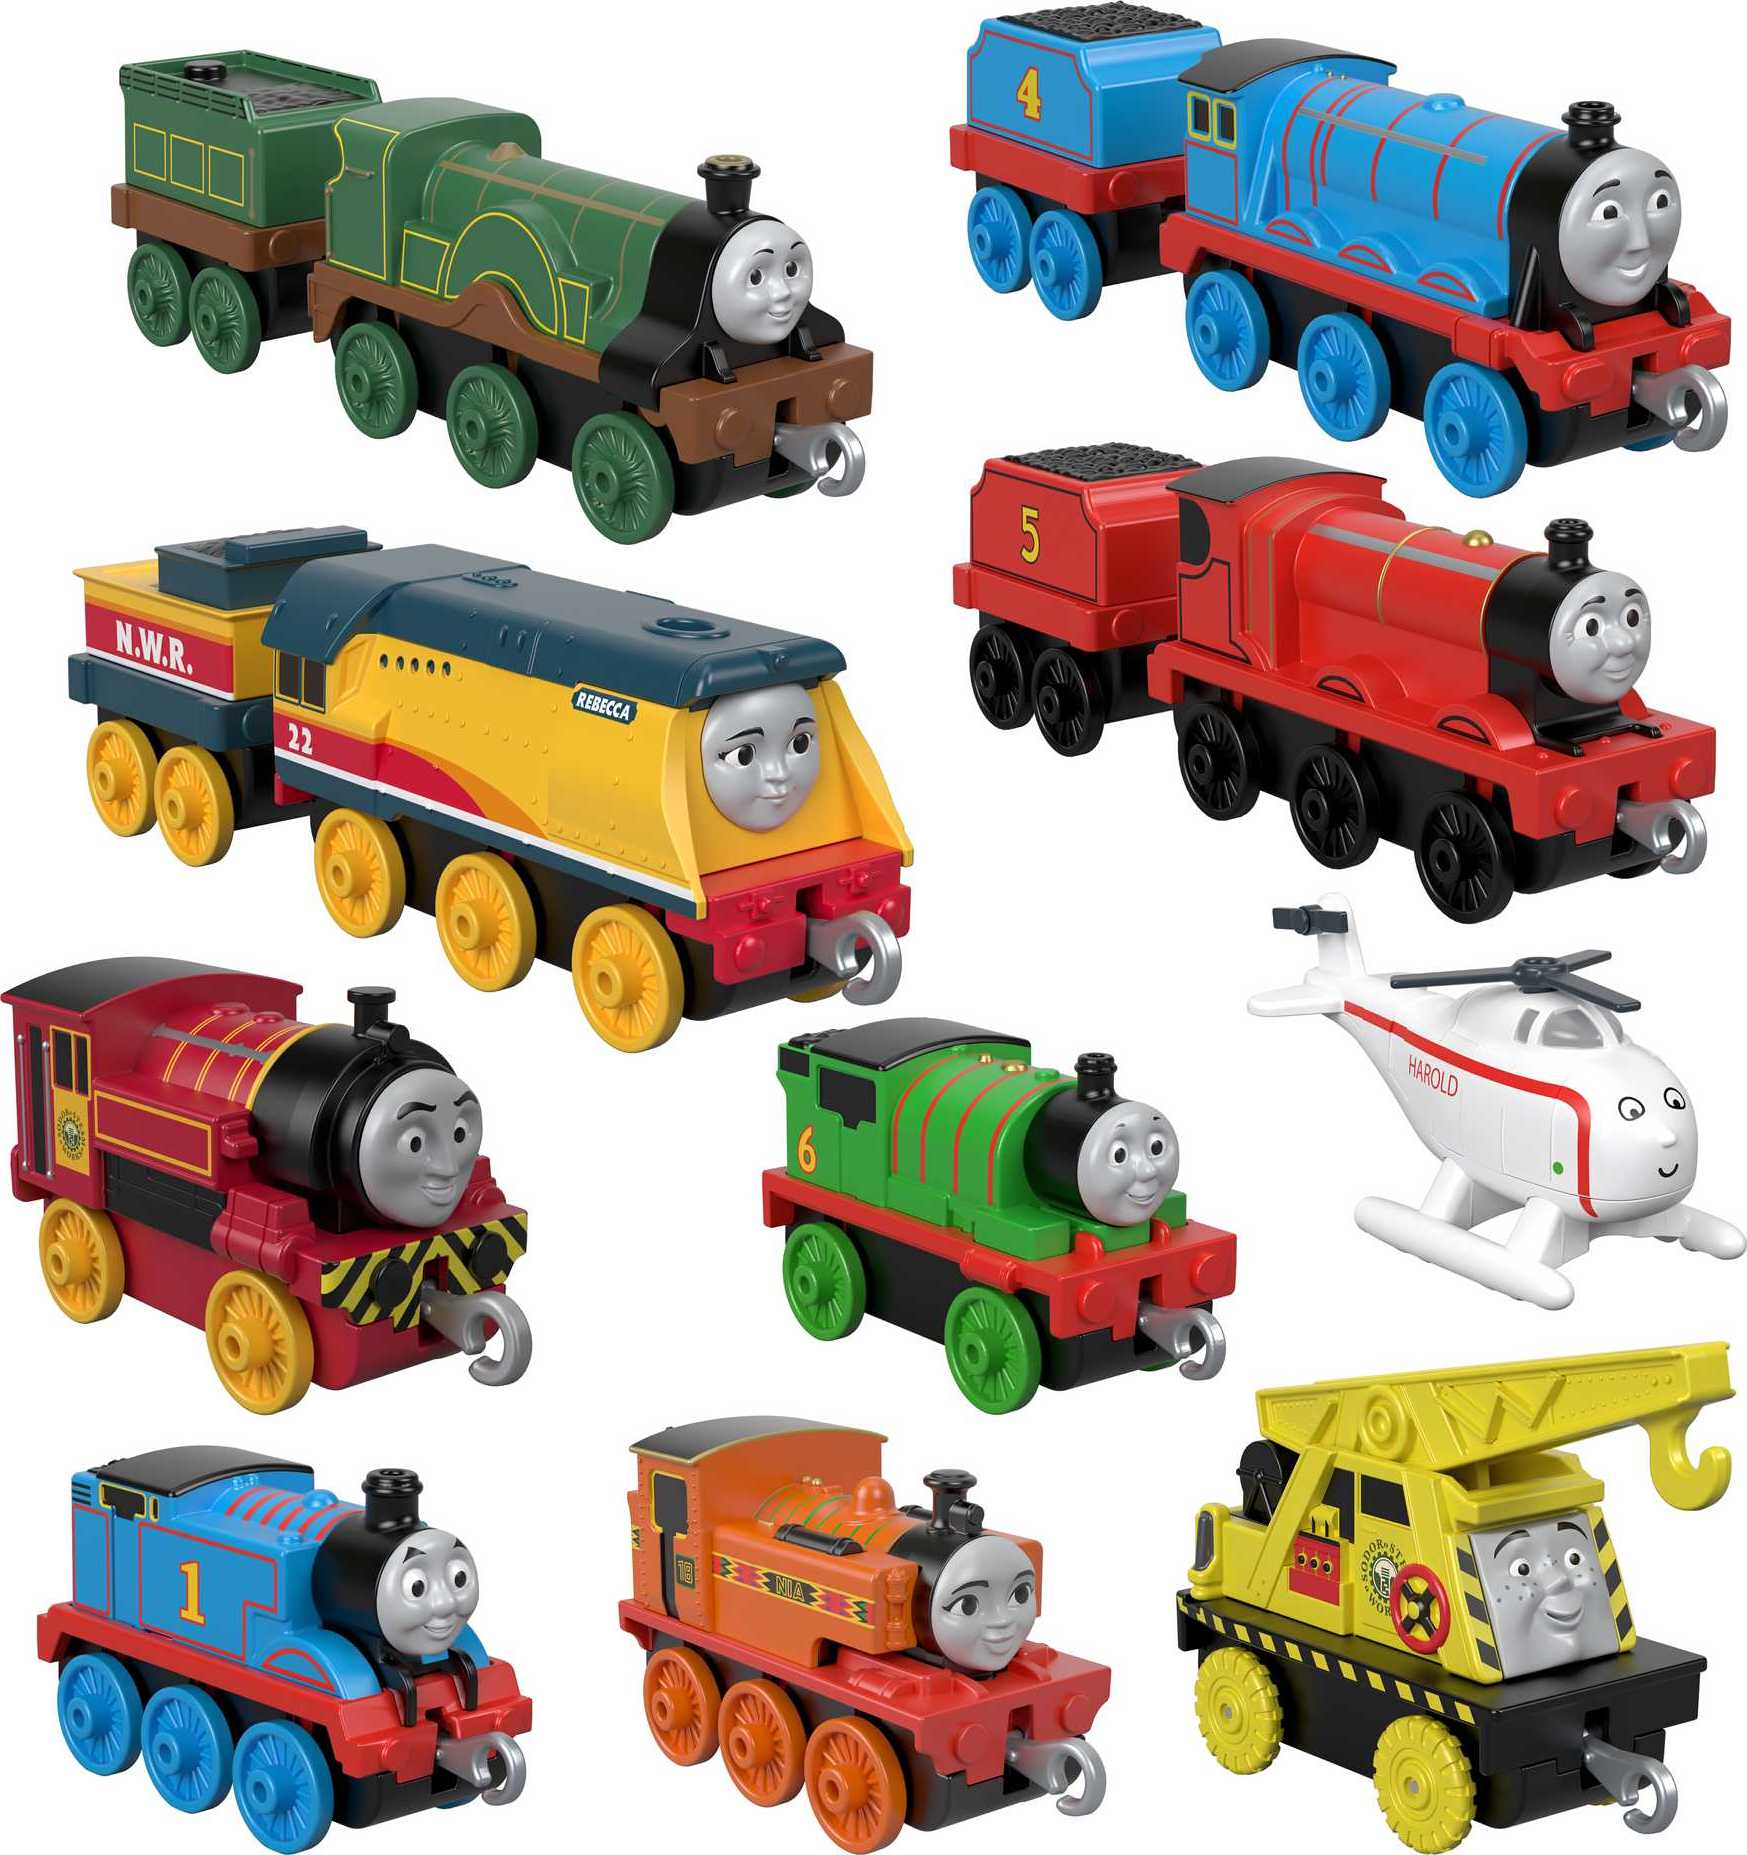 Thomas & Friends TrackMaster Sodor Steamies 10-Pack Diecast Toy Trains & Vehicles - image 1 of 7